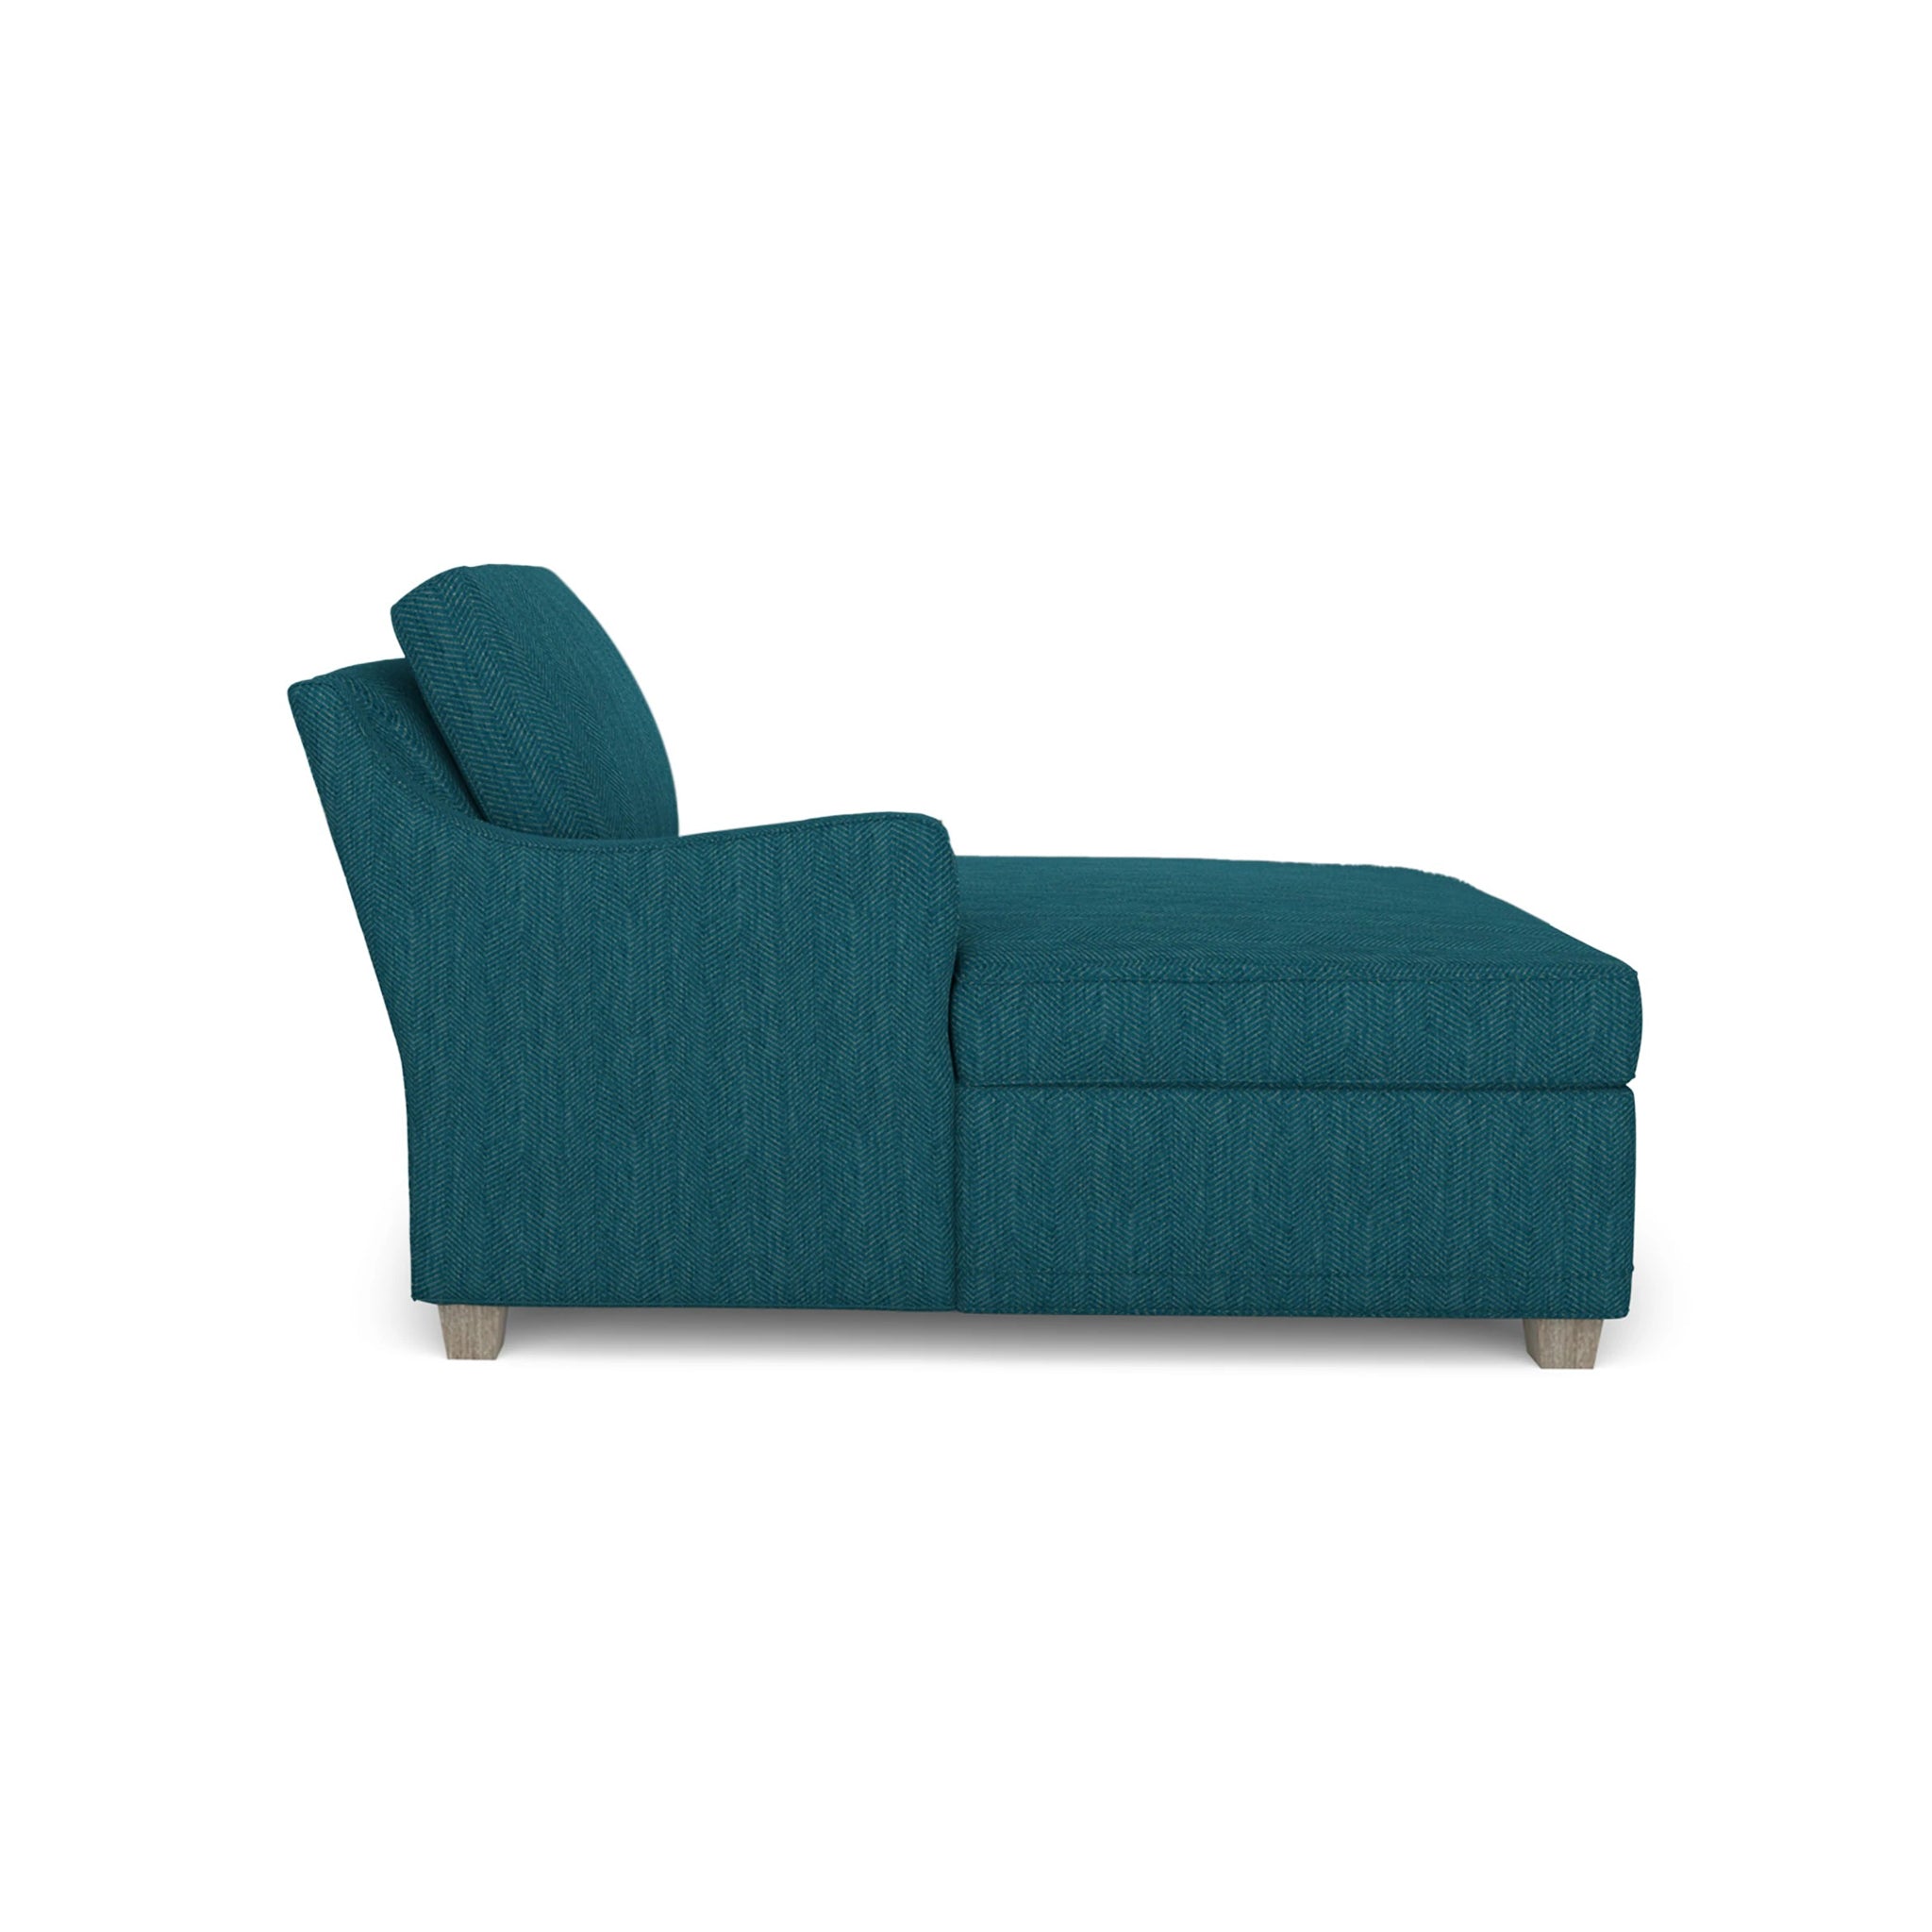 The Lyme Estate Collection - LAF Chaise